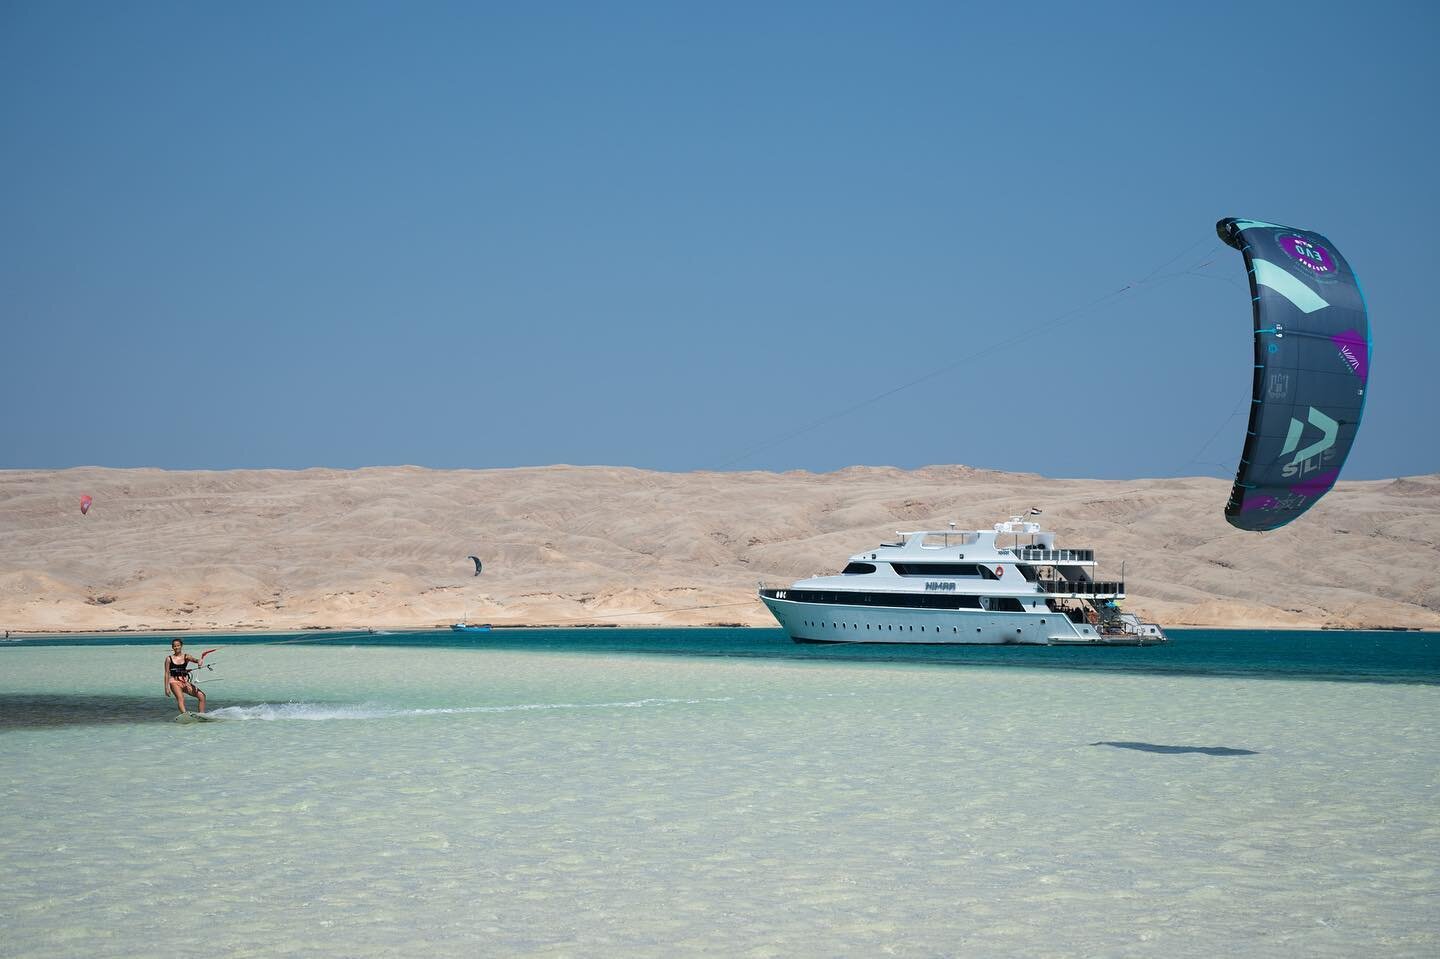 Our floating mansion for the week. En-suite rooms, spacious living room, restaurant and sun deck. Anchored in crystal clear blue waters and just a stone throw away from the kite spot.

#egypt #redsea #kitesurf #kitecruise #kitesafari #kiteholiday #ki